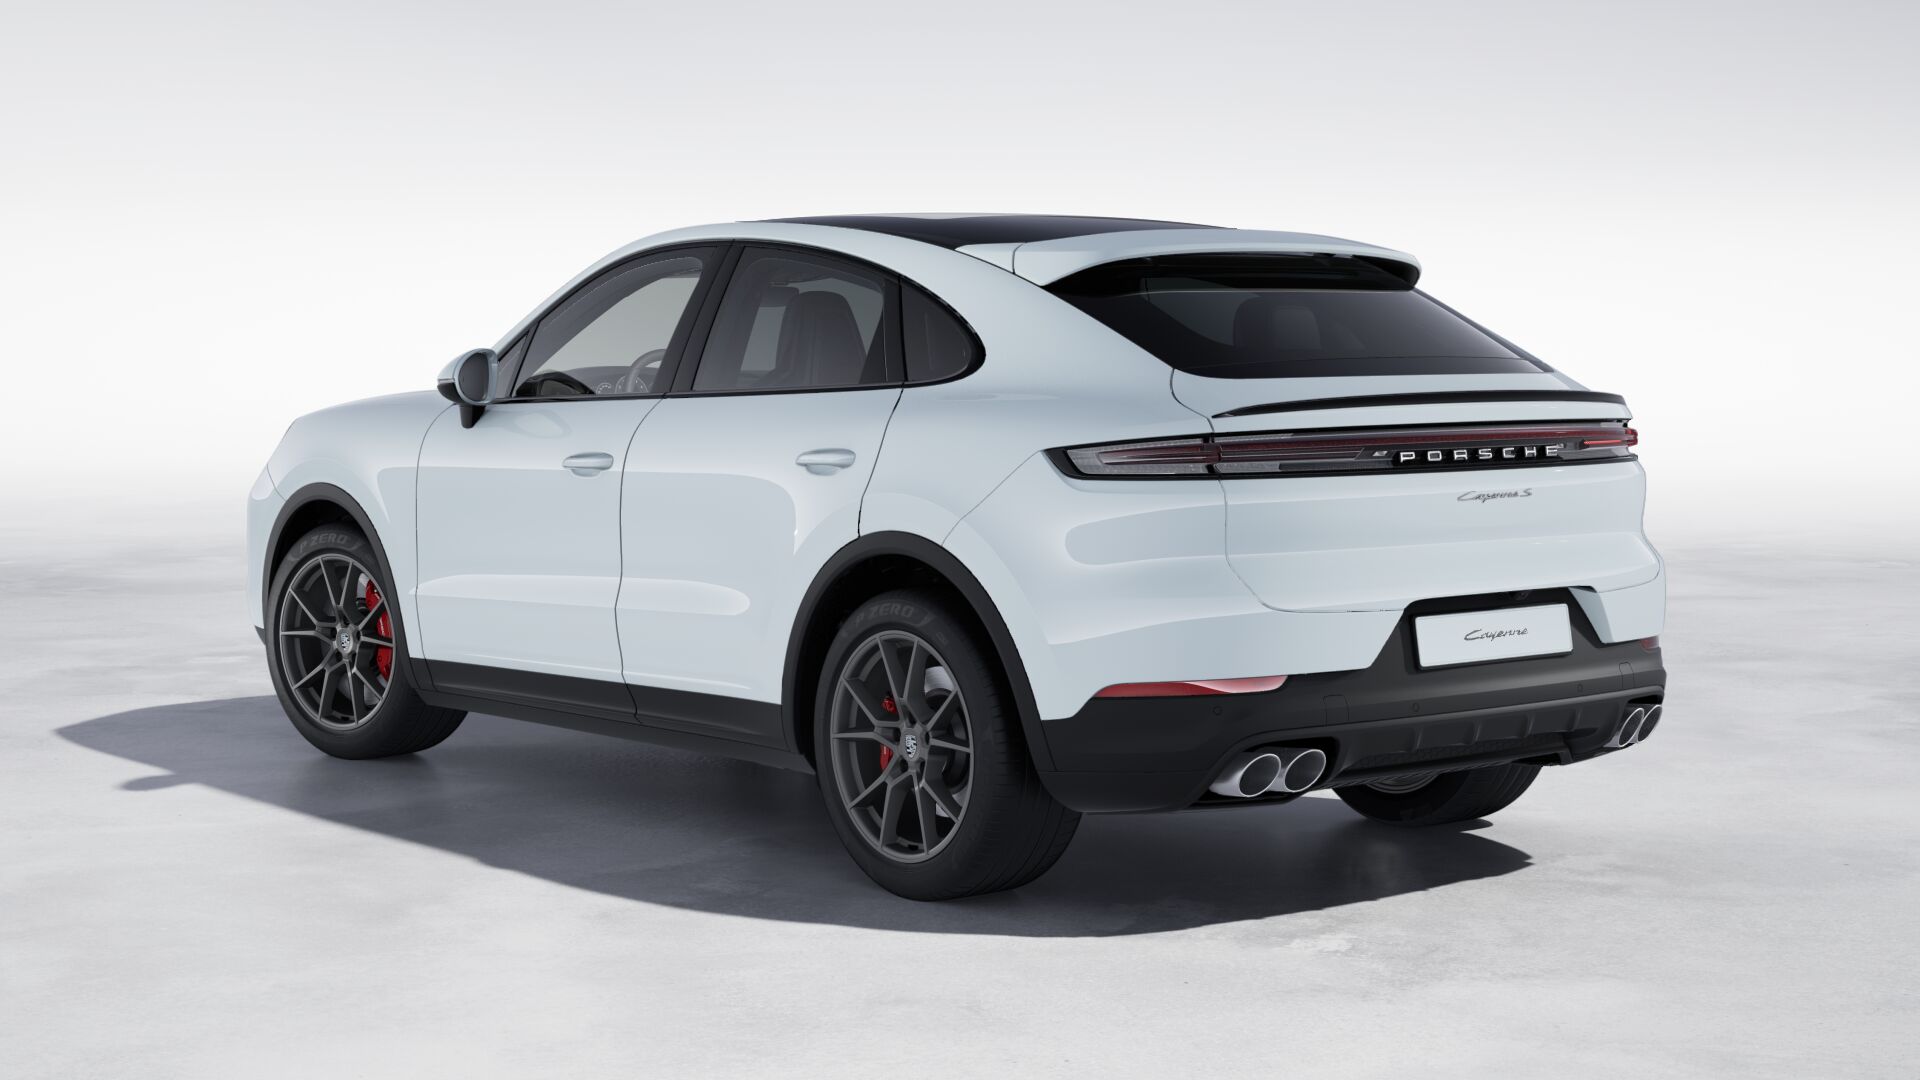 Exterior view of Cayenne S Coupe